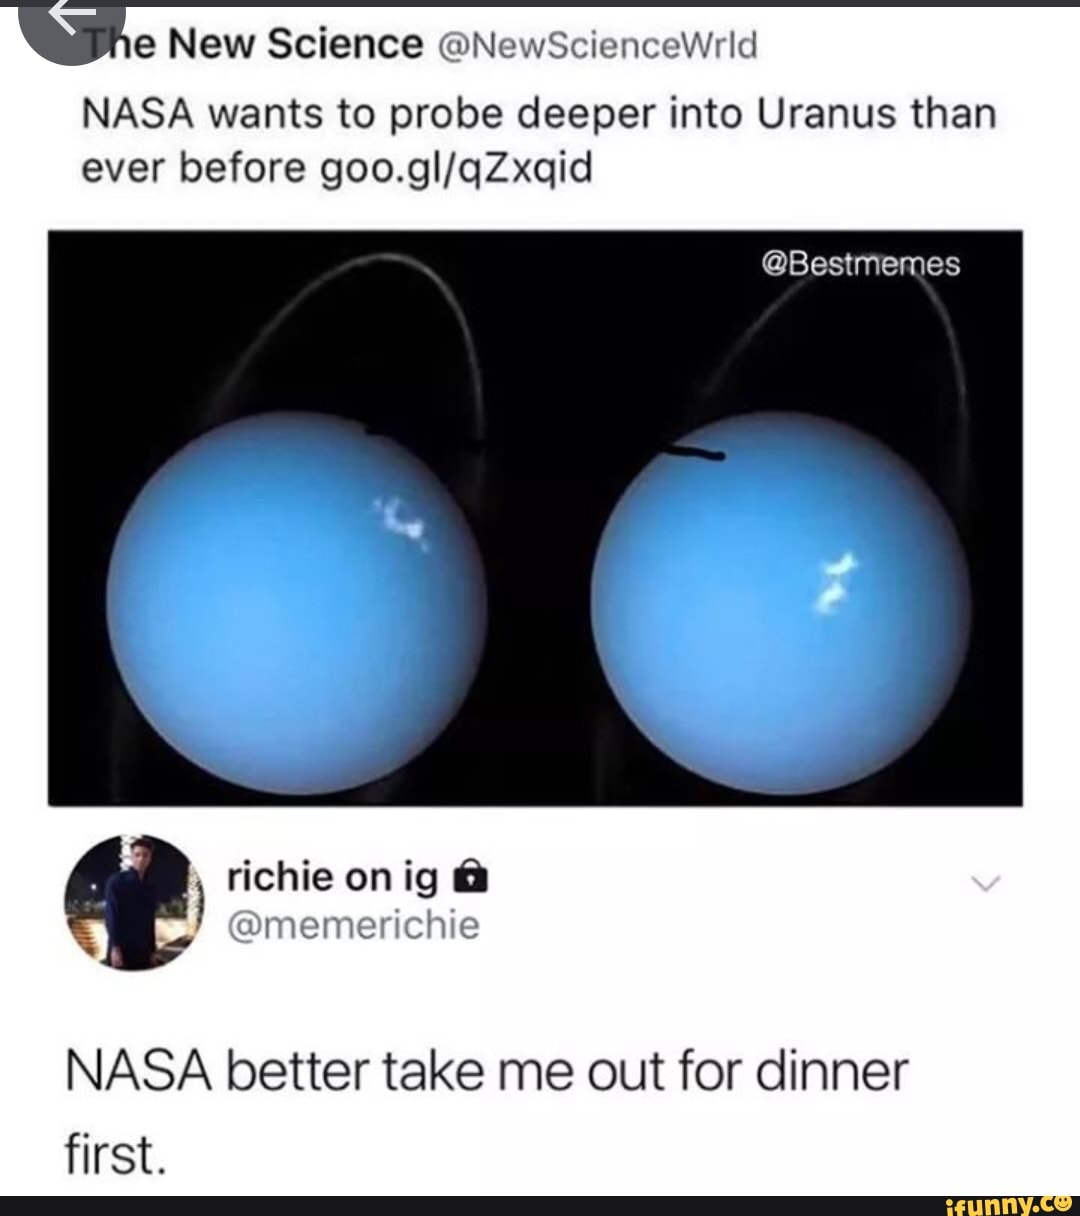 Screenshot of news article with headline reading: "Nasa wants to probe deeper into Uranus than ever before